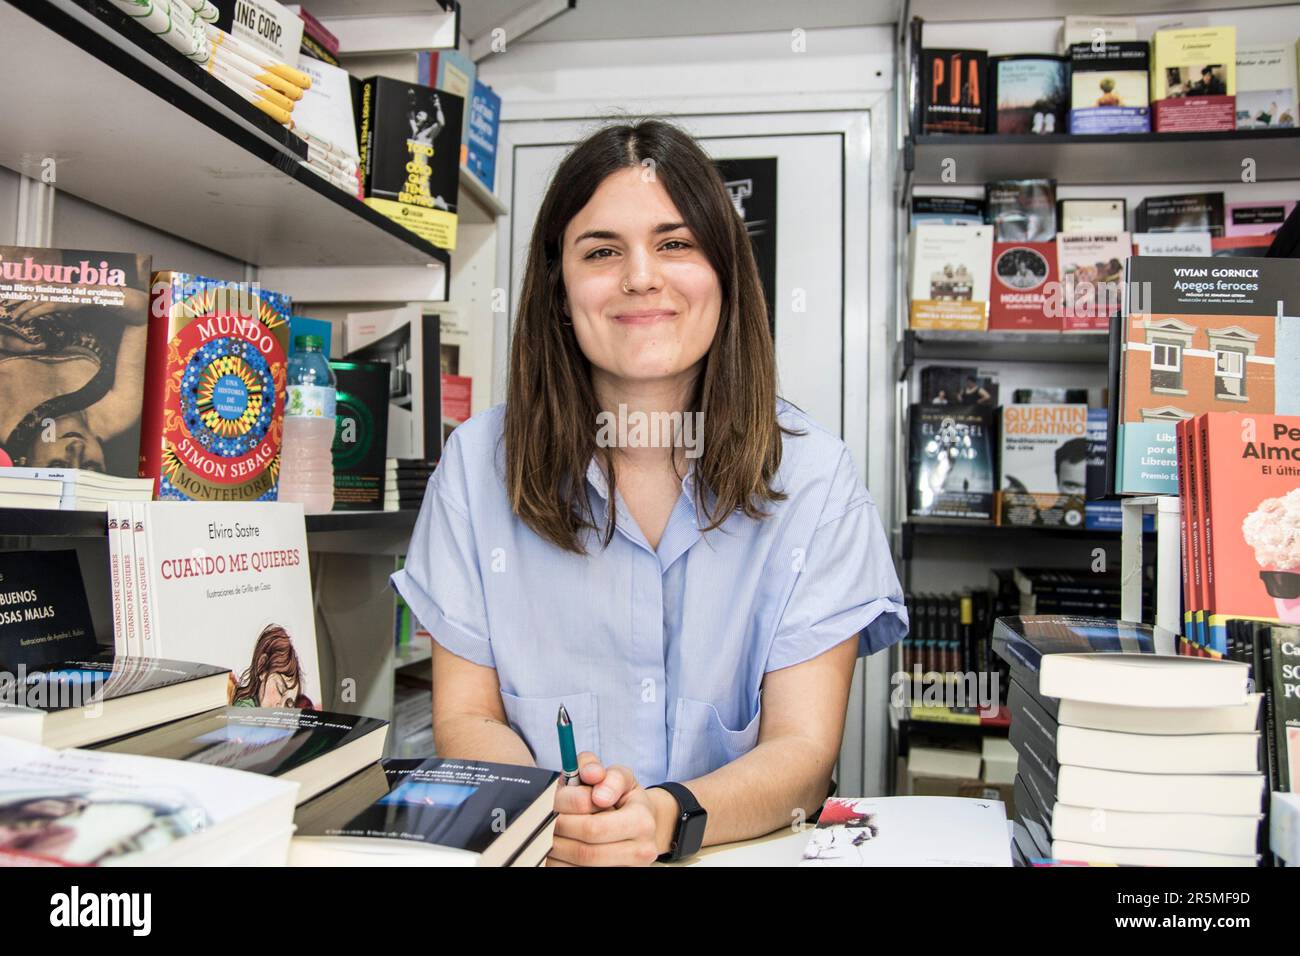 THE POETRY, POET WRITER AND PHILOLOGIST ELVIRA SASTRE WITH THE WORK 'WHAT HAS NOT YET WRITTEN' AT THE MADRID BOOK FAIR 82 EDITION IN THE PARK OF EL RETIRO MADRID SPAIN Credit: agefotostock /Alamy Live News Stock Photo